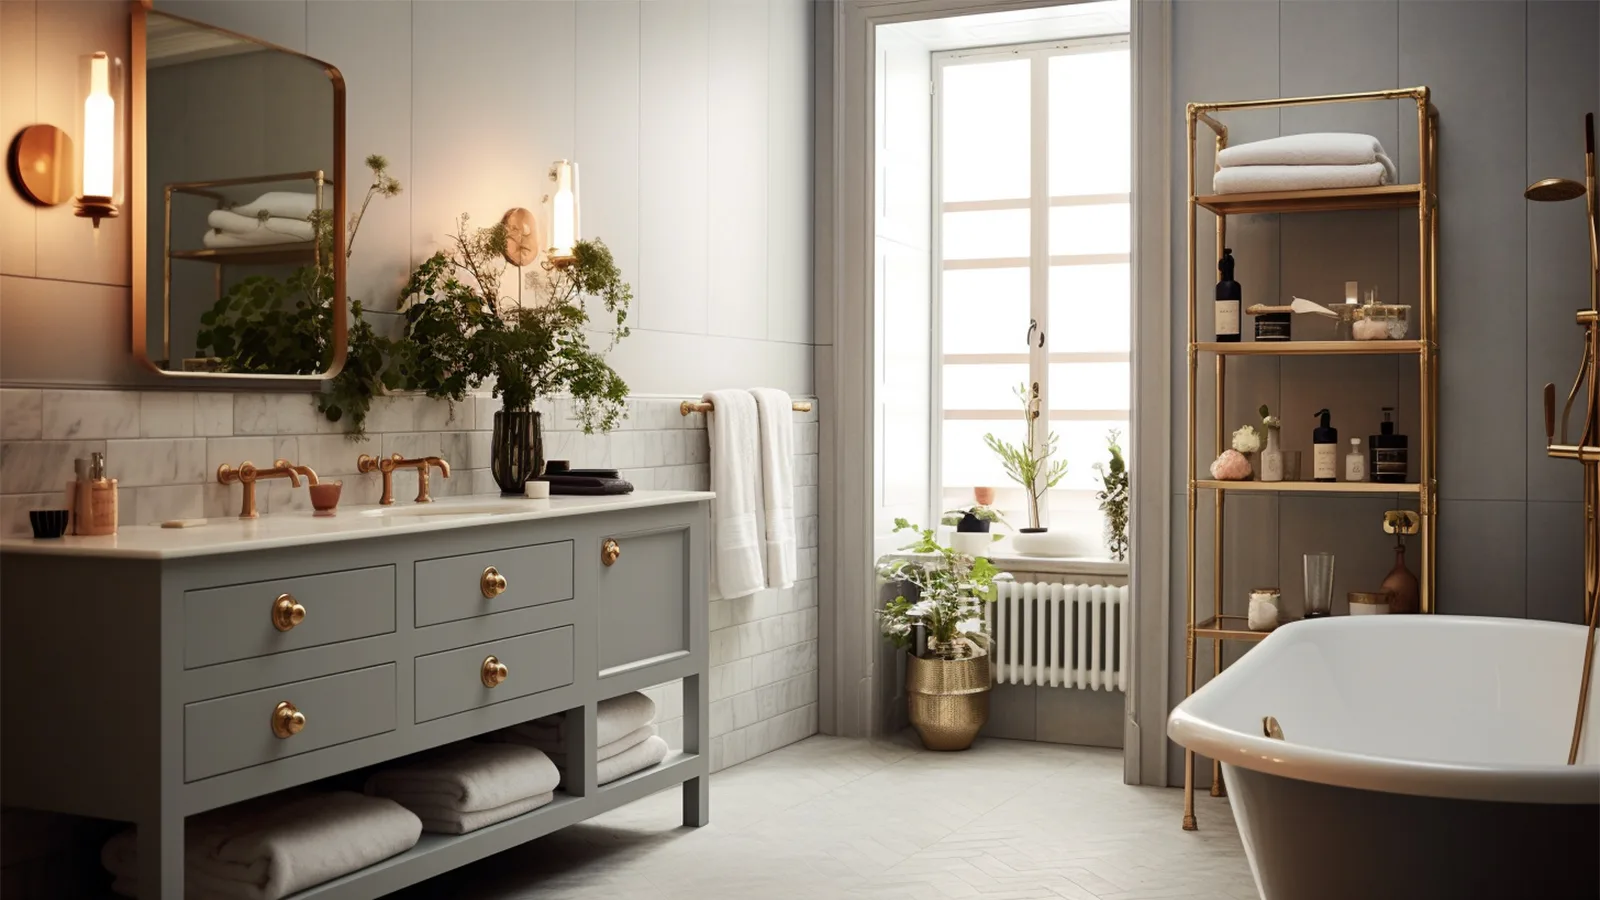 Tips for decorating a bathroom with a tub, sink, and shelves in an apartment.